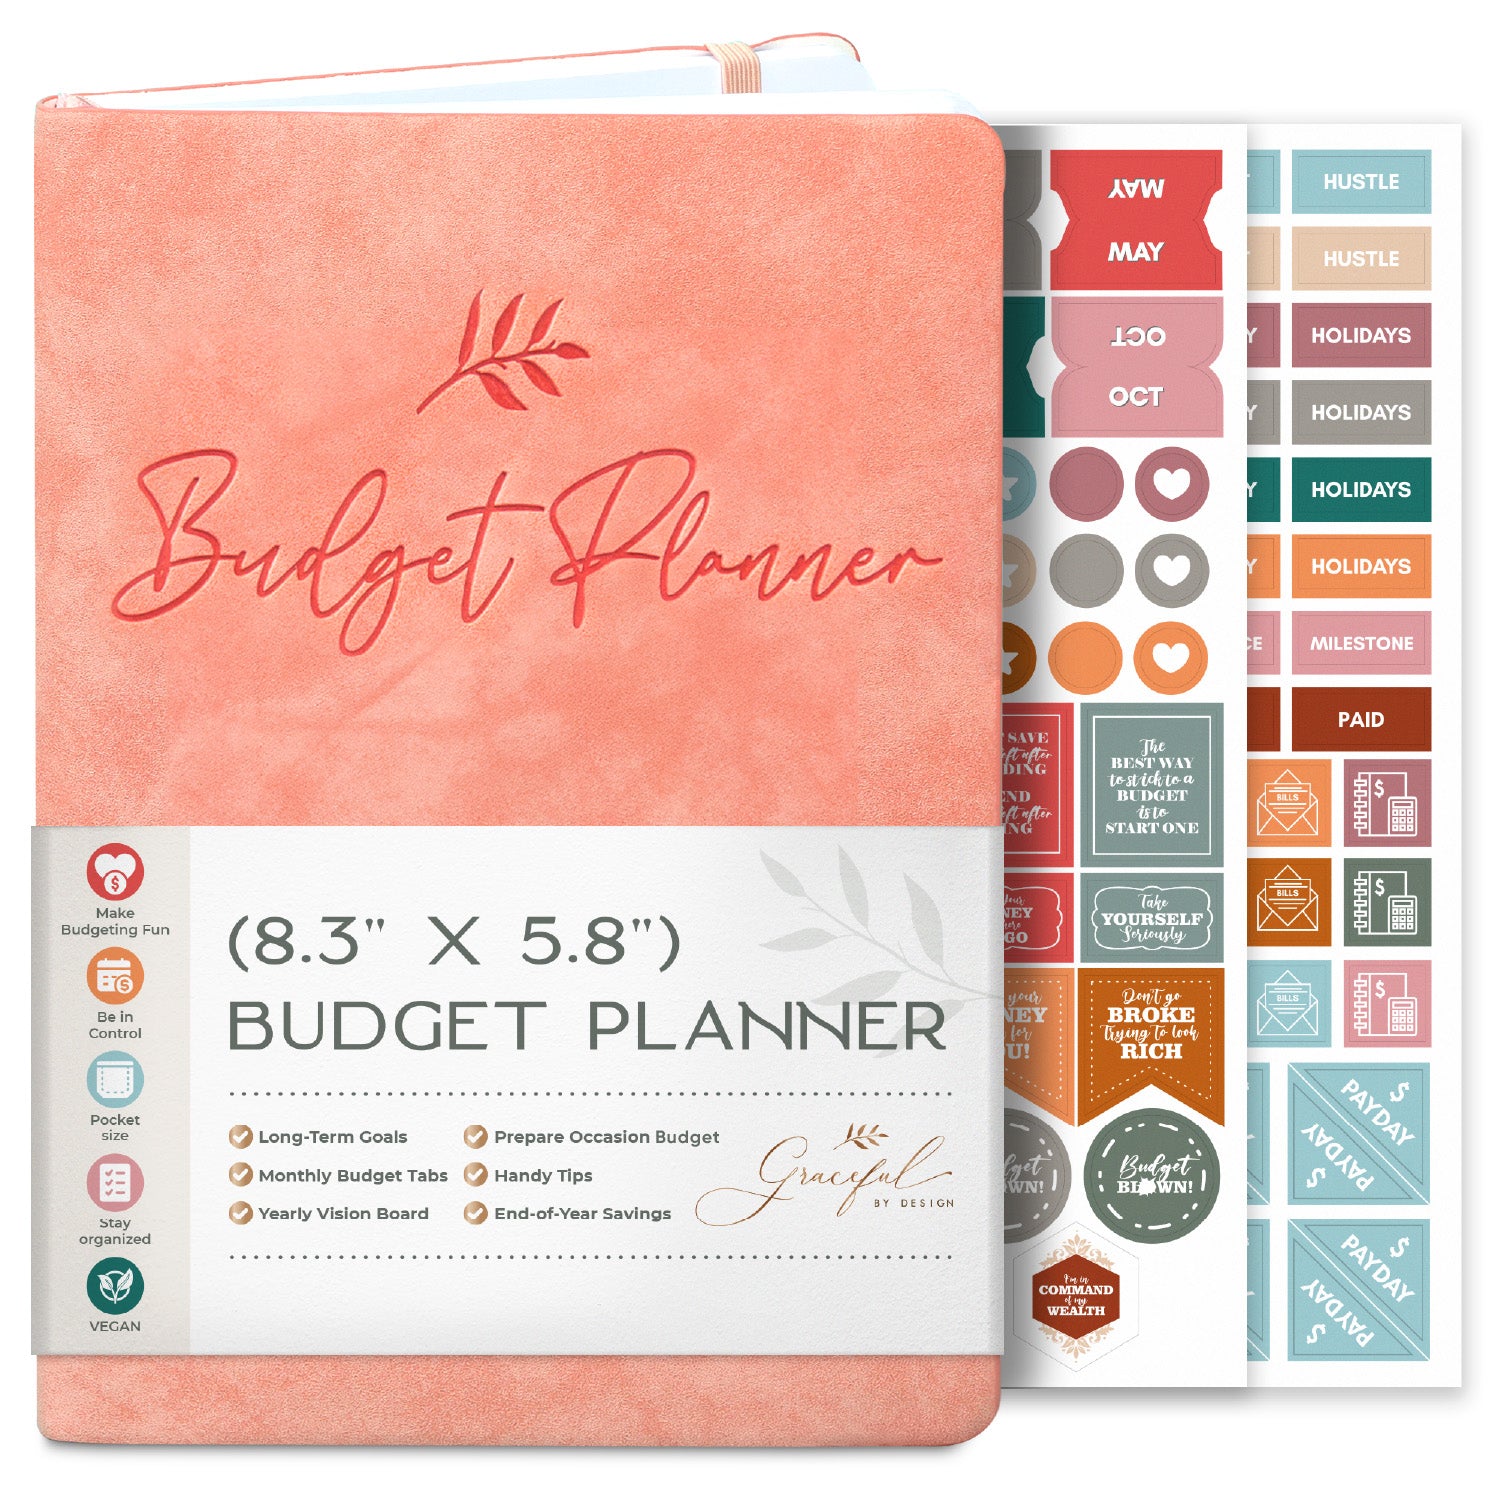 Monthly Budget Planner - Take Control of Your Finances, Track Expenses, and Review Progress